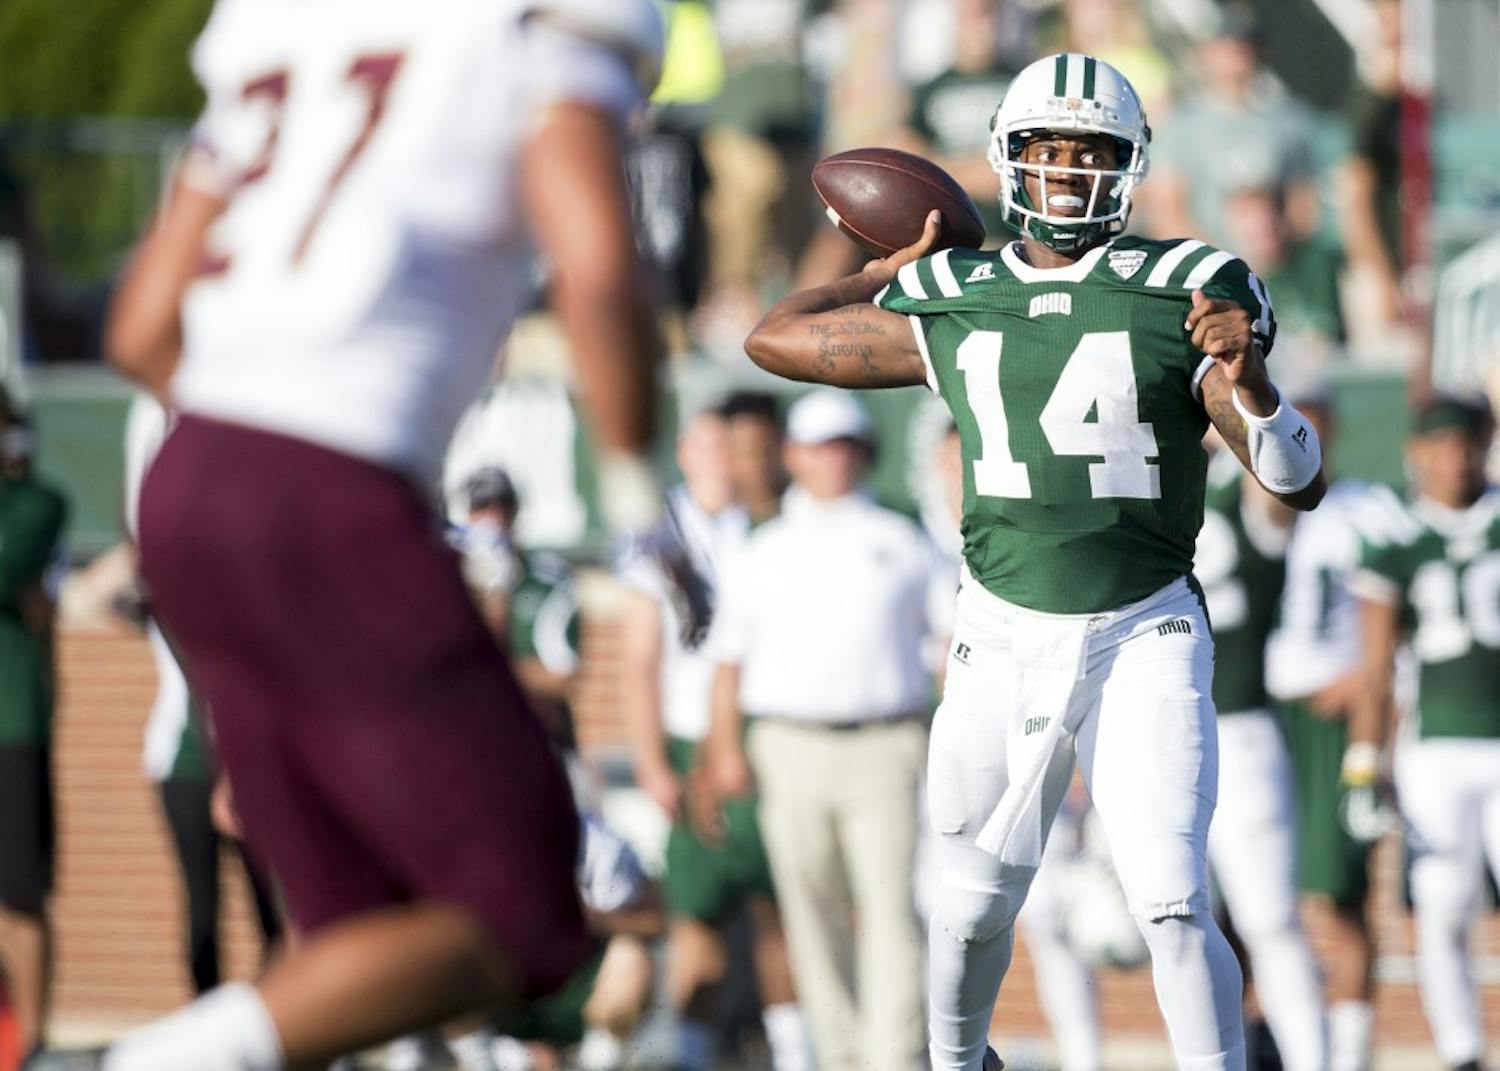 Ohio redshirt senior quarterback Greg Windham (#14) passes downfield against Texas State on Saturday, September 3, 2016. Windham passed for 308 yards in his first game as starting quarterback. 